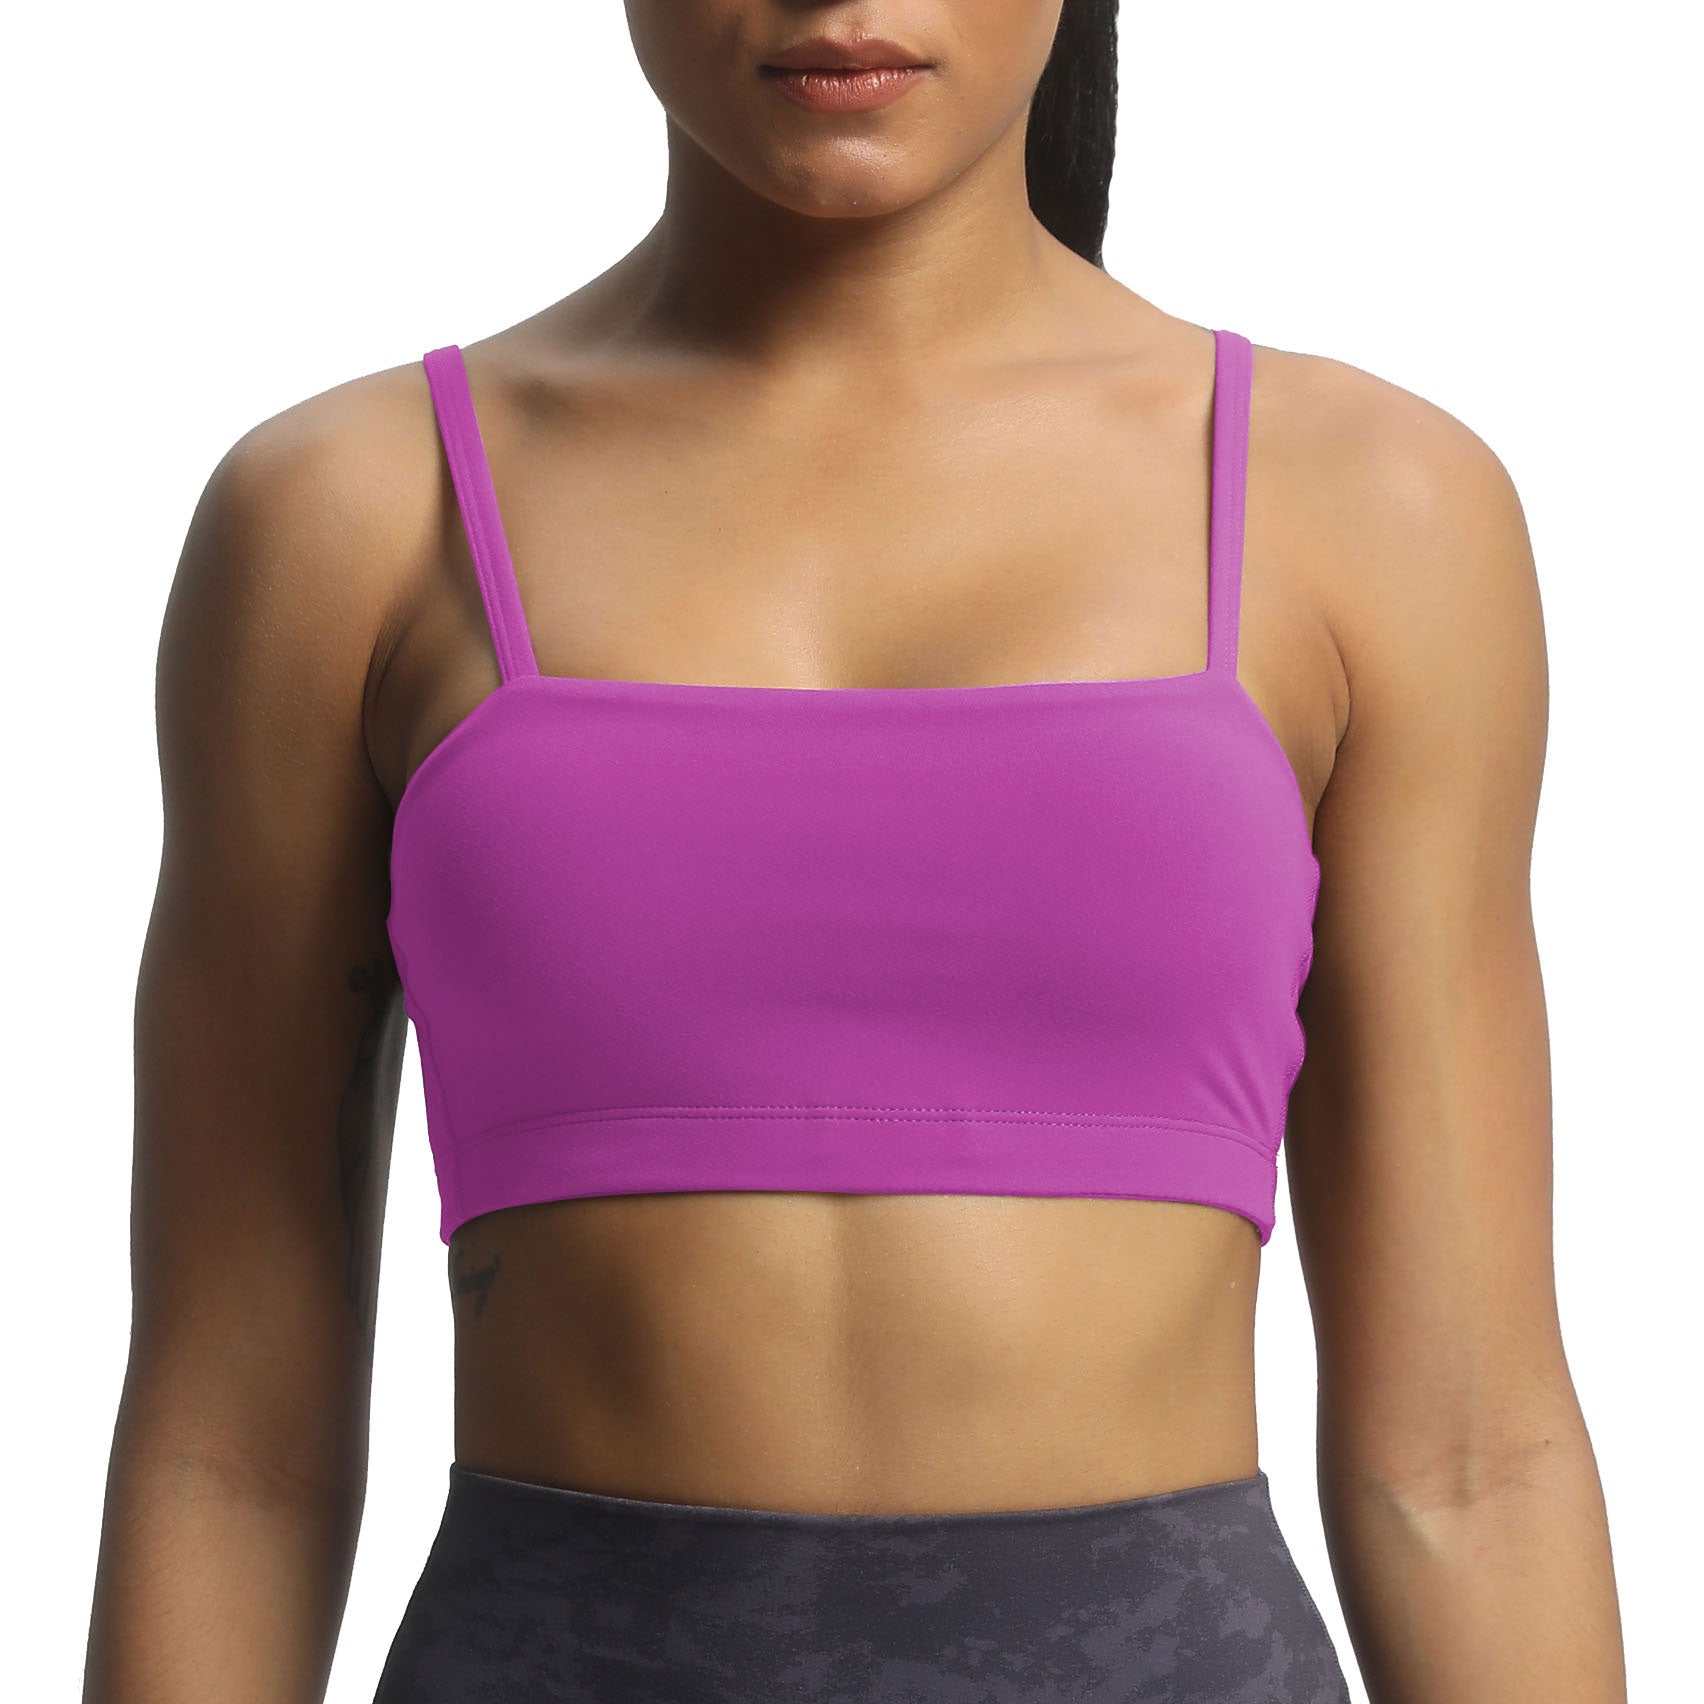 Aoxjox Women's Workout Sports Bras Fitness Backless Padded Taylor